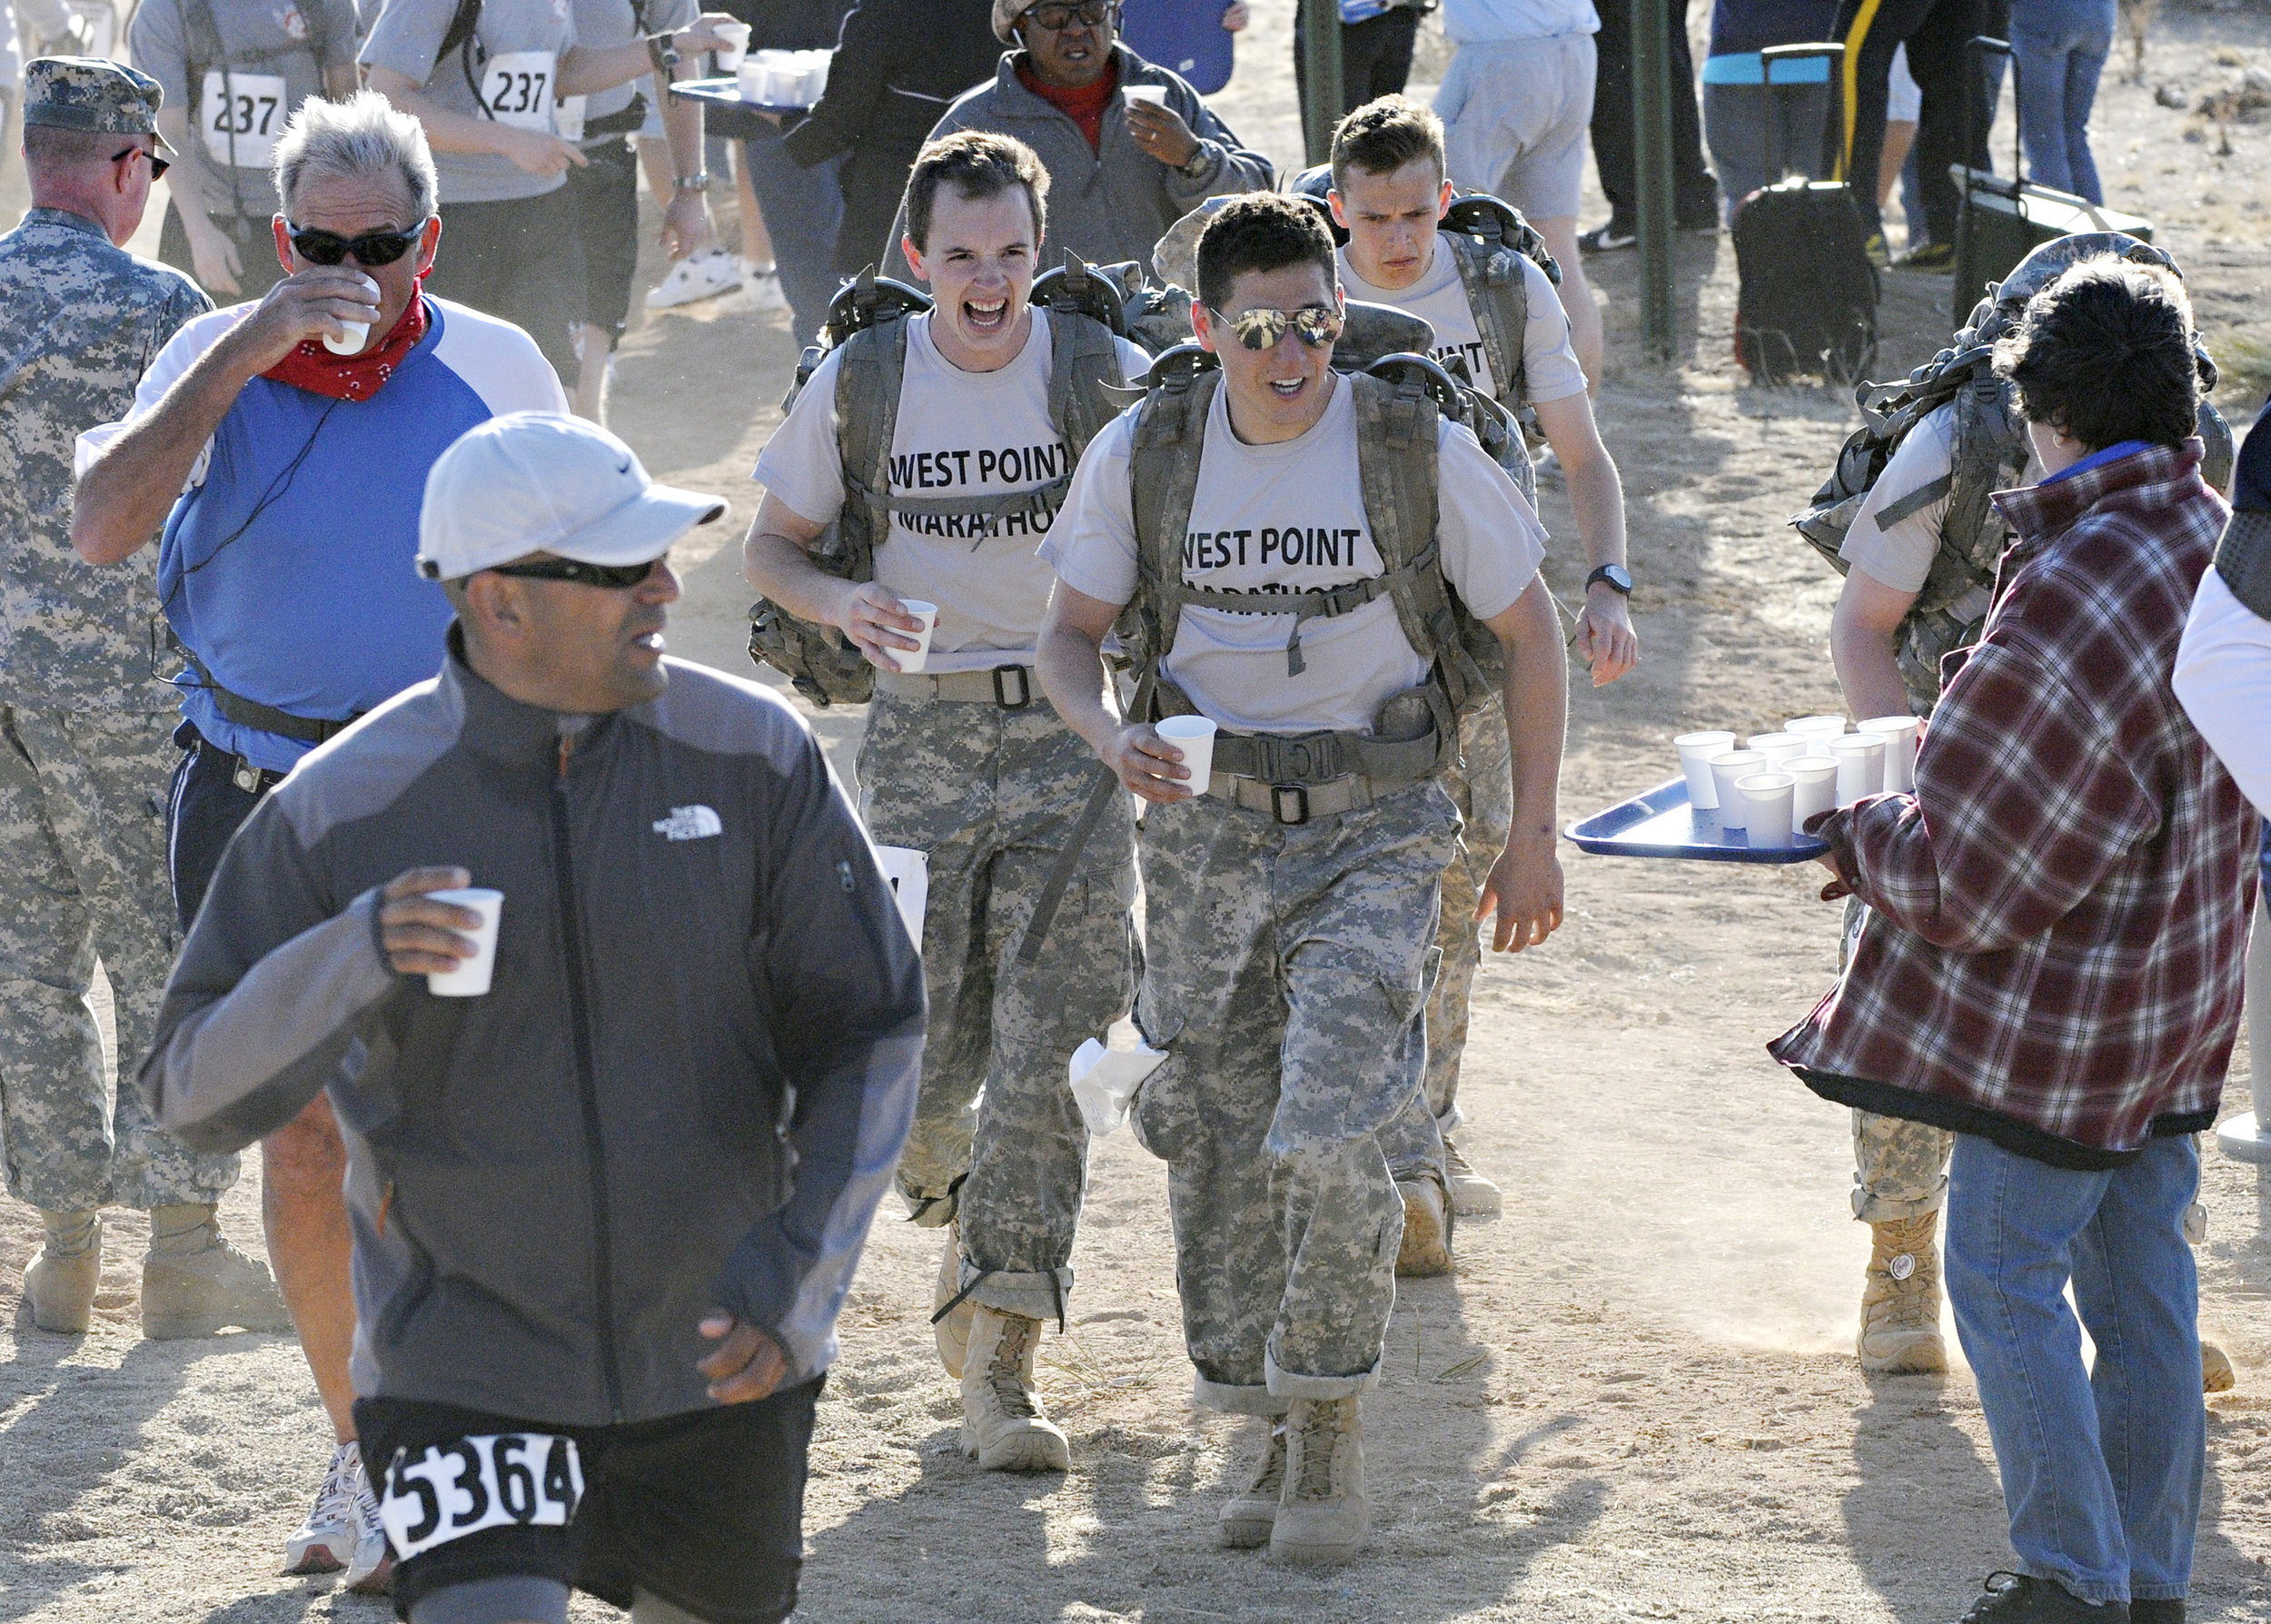  Walk participants hydrate at water point 3 during the 22nd Annual Bataan Memorial Death March at White Sands Missile Range, Sunday, March 27, 2011. (Morgan Petroski/Albuquerque Journal) 